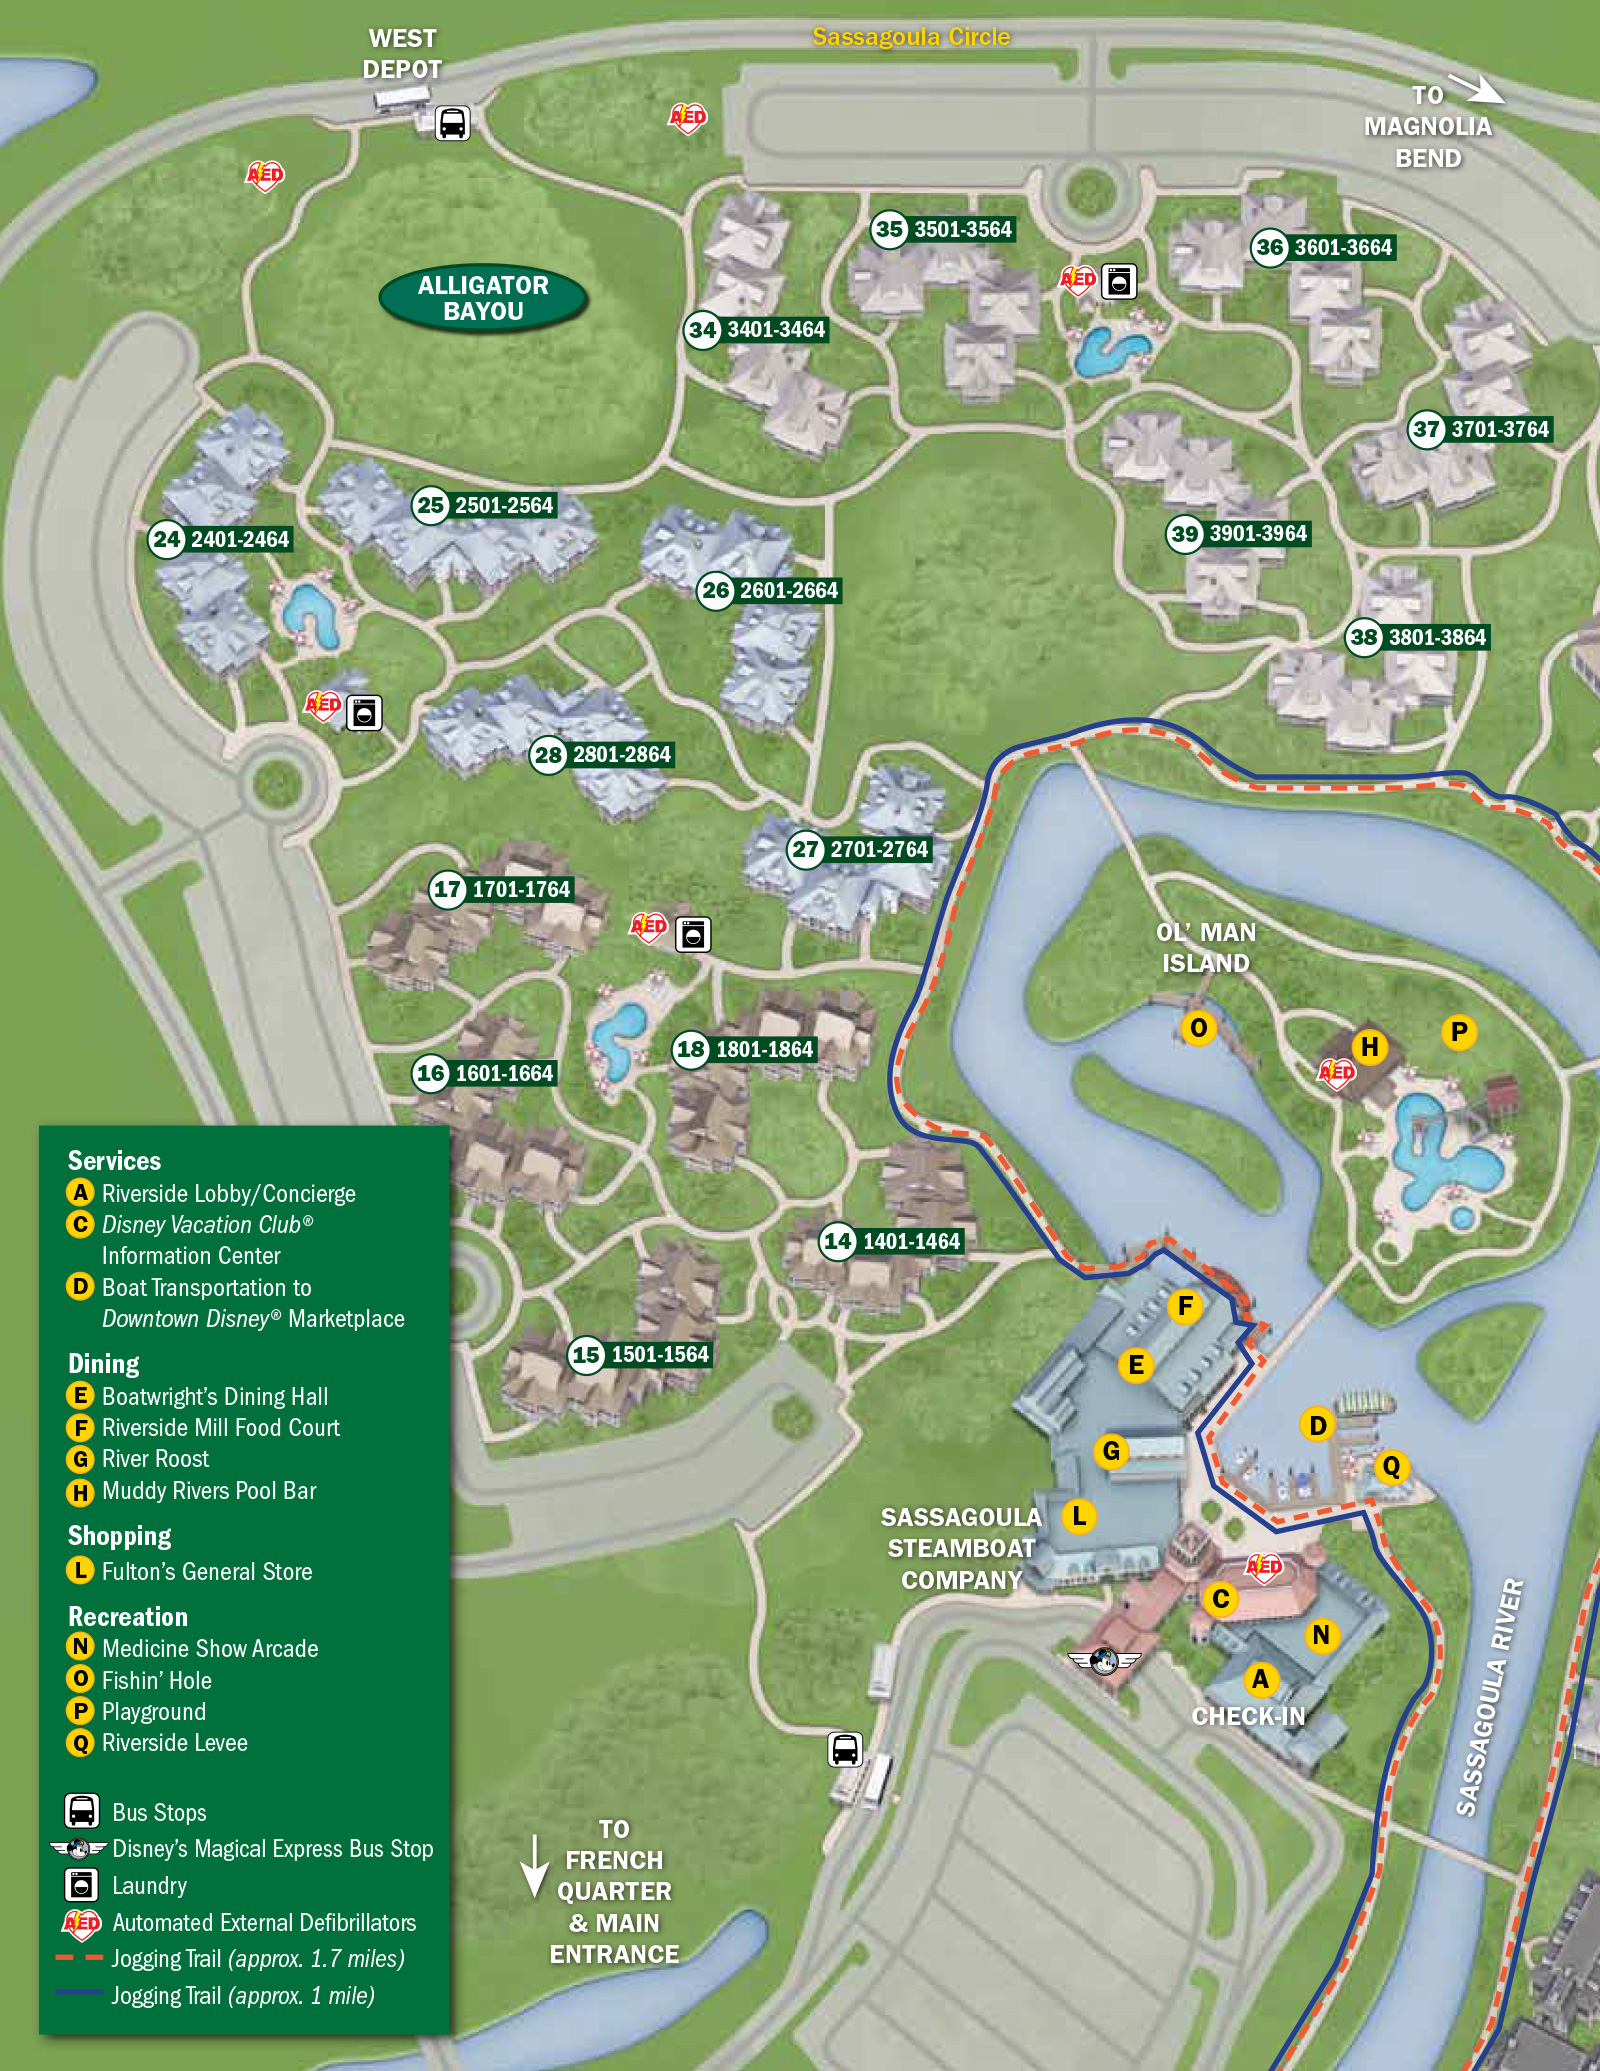 2013 Port Orleans Riverside guide map Photo 2 of 4